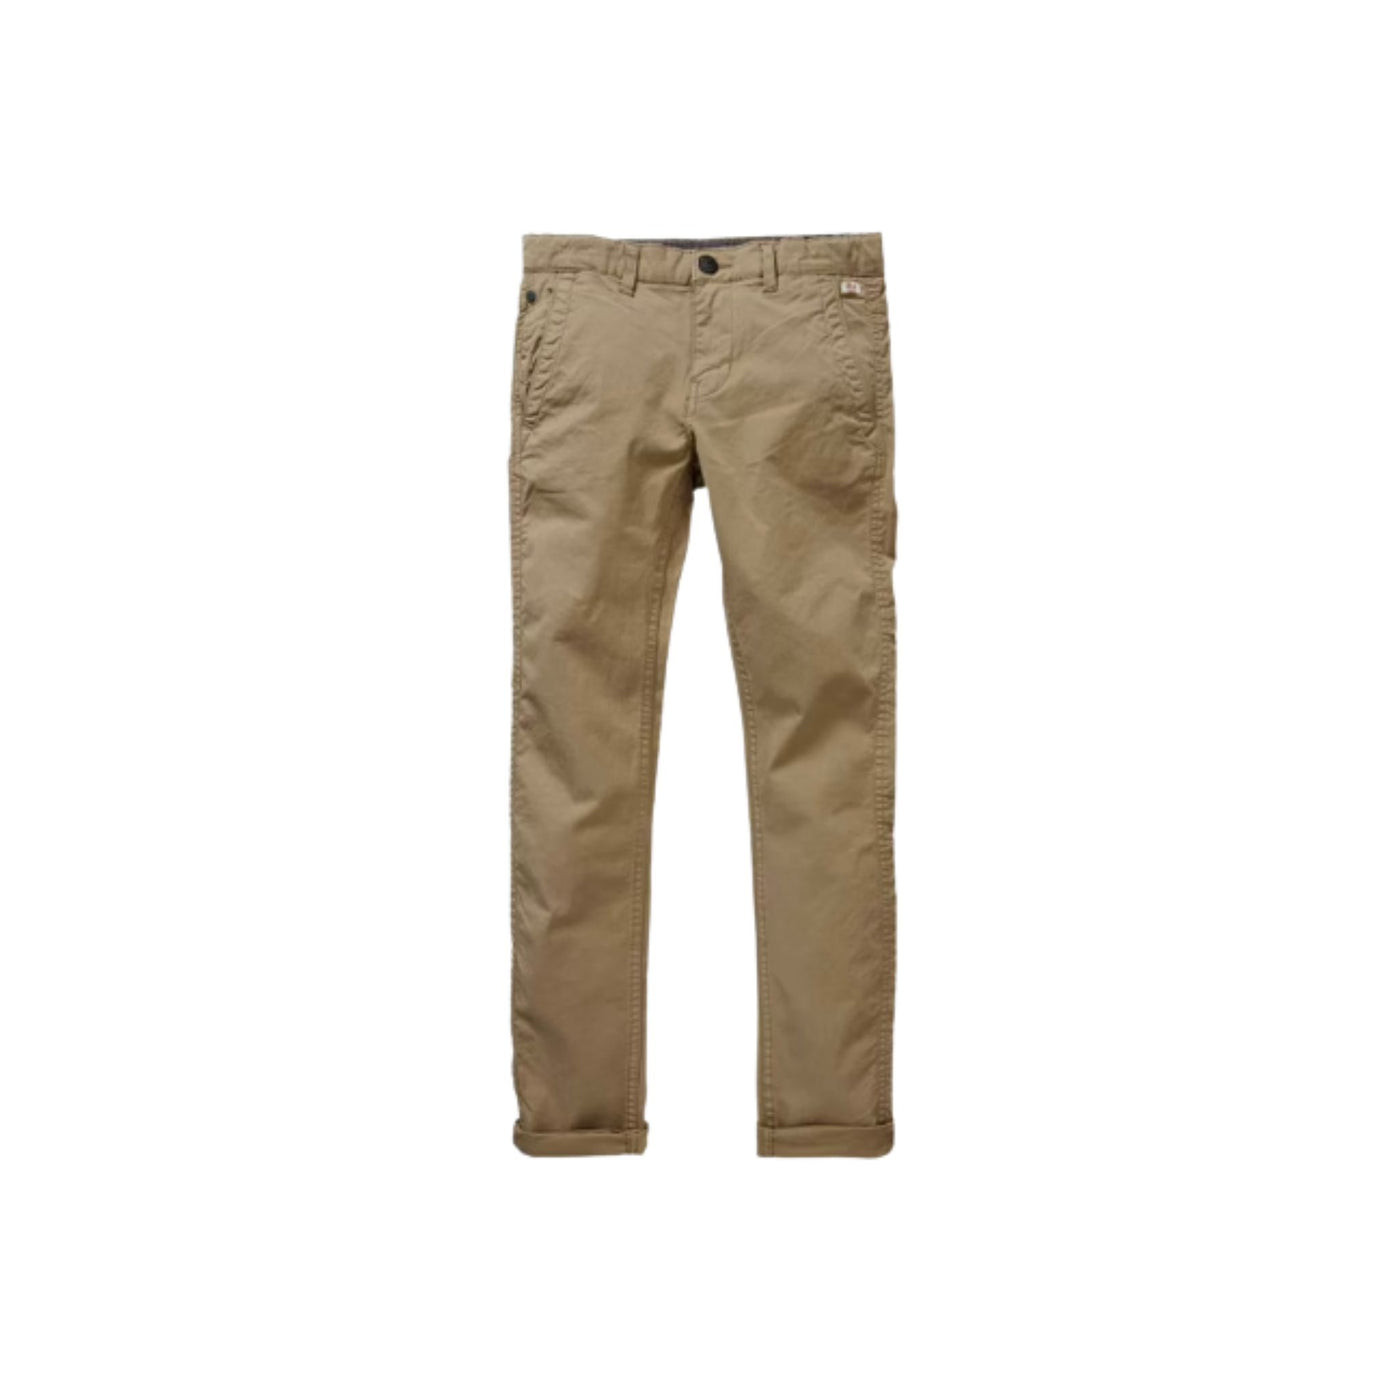 Boy's trousers in solid color with side pockets